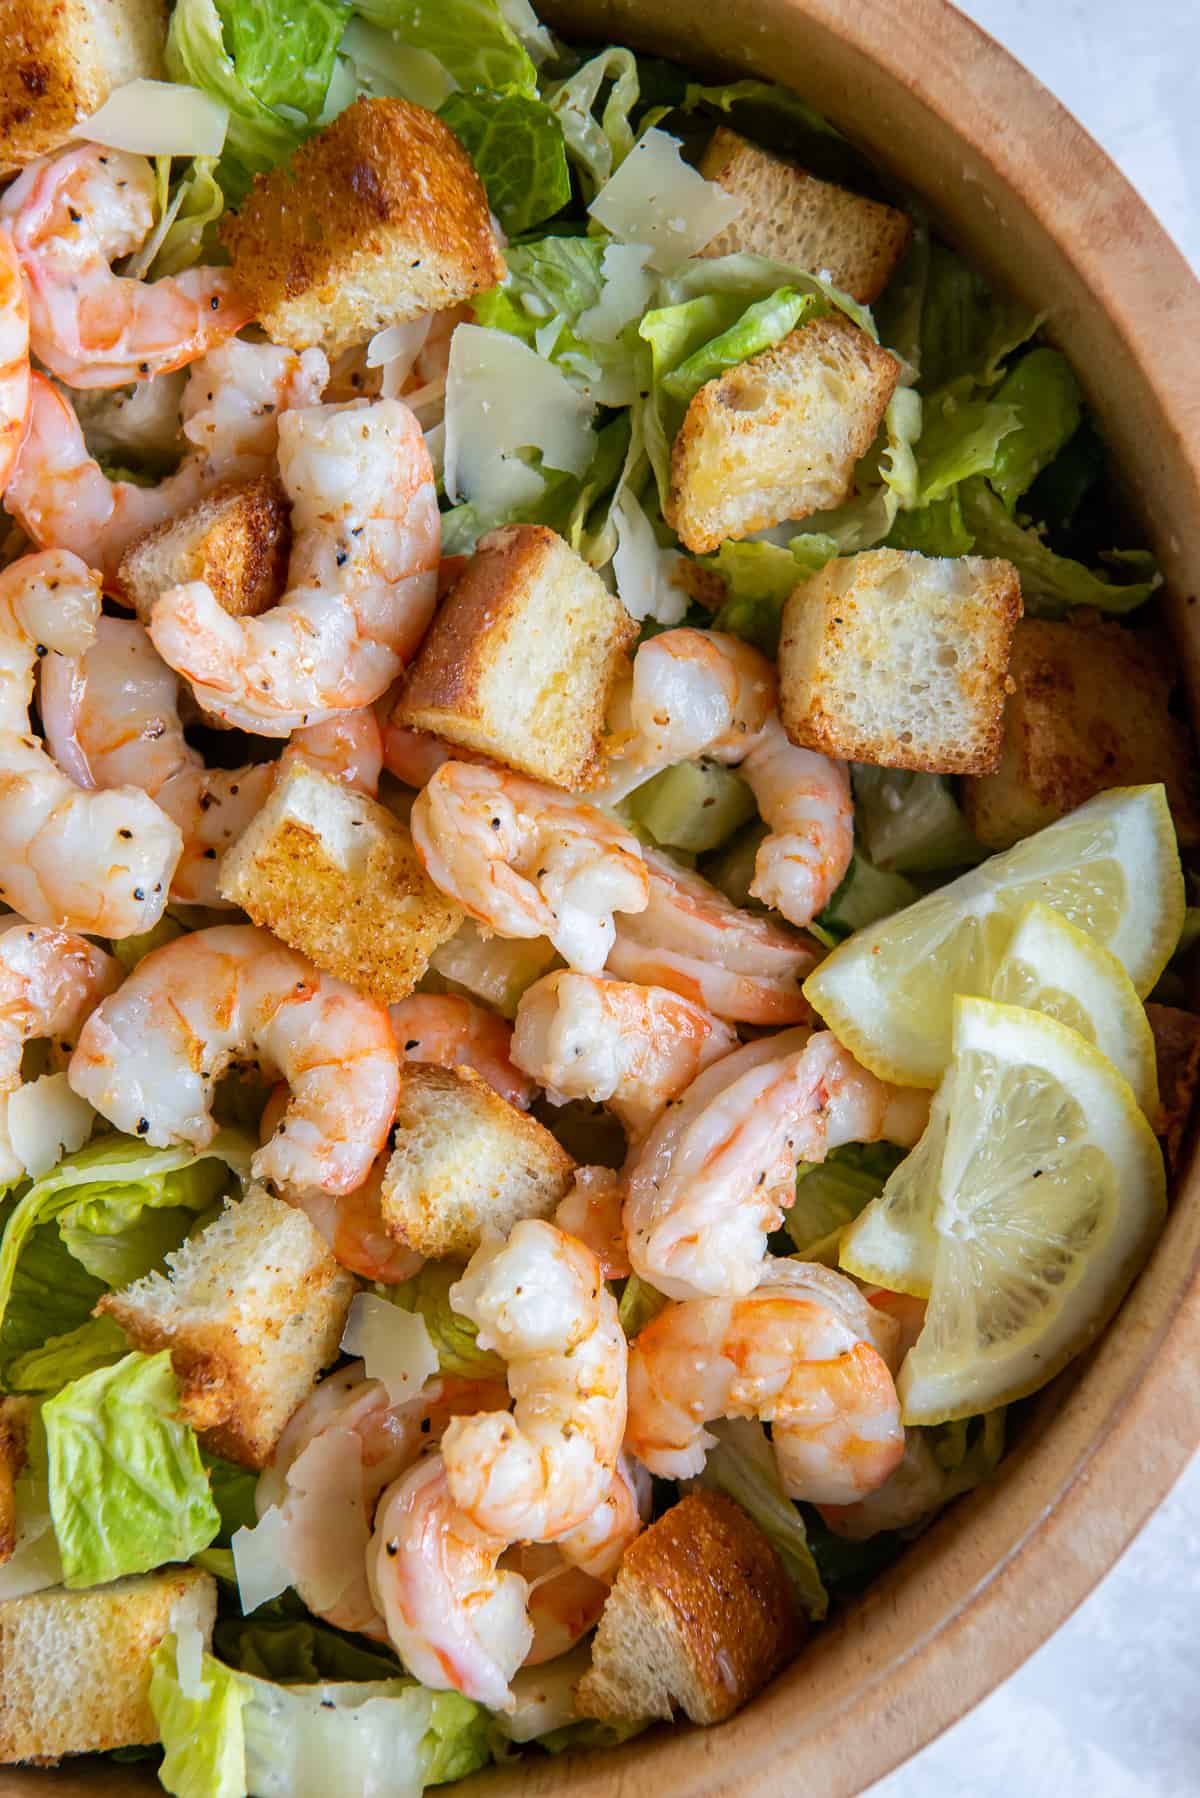 A top down close up of roasted shrimp on a bed of romaine lettuce with croutons and slices of lemon in a wood bowl.